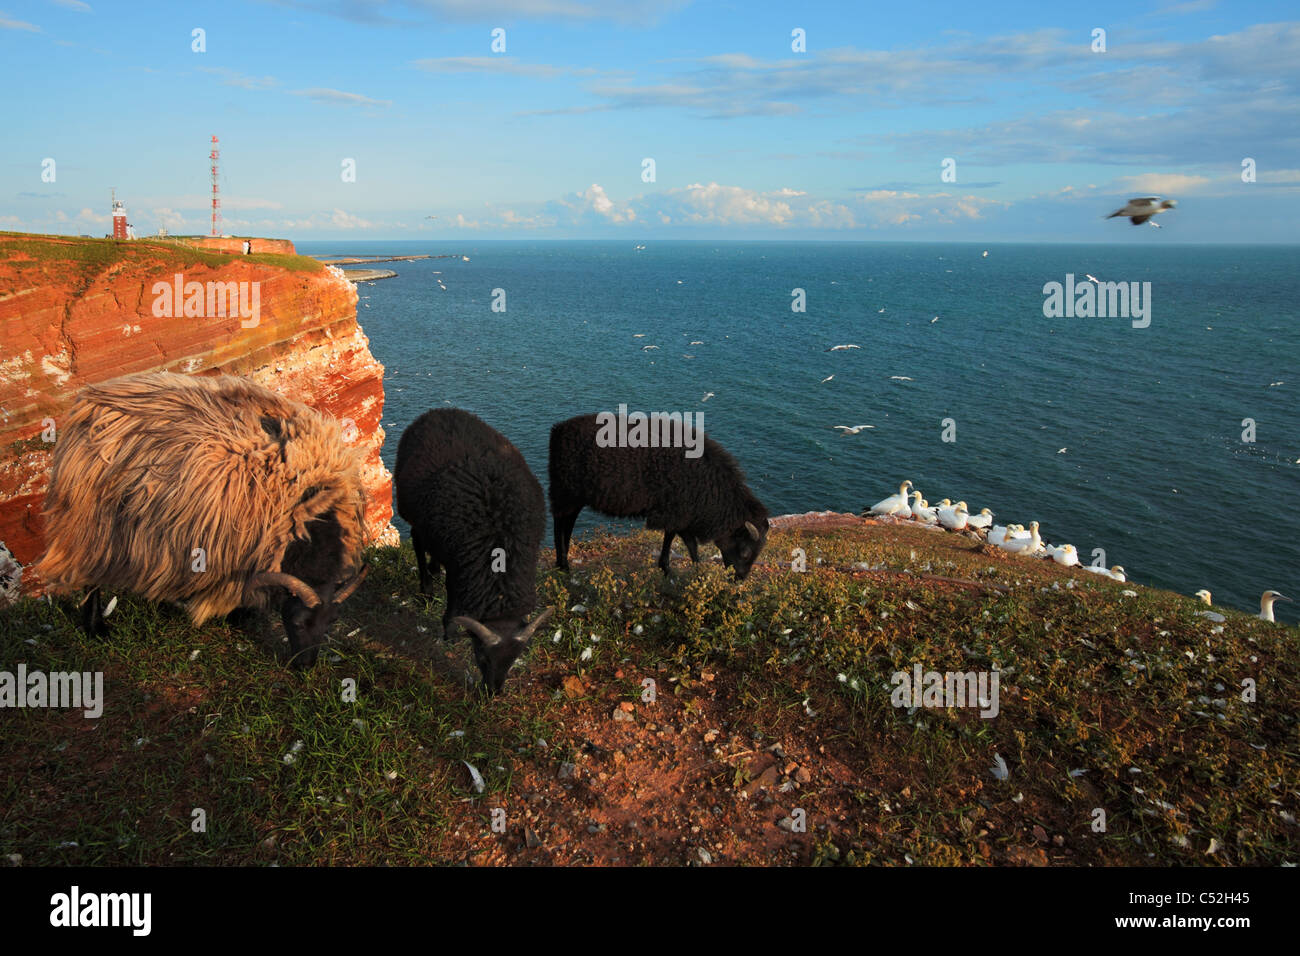 sheeps on the red bird cliff on island Heligoland (Helgoland); gannets sanctuary and the Heligoland lighthouse in the background Stock Photo